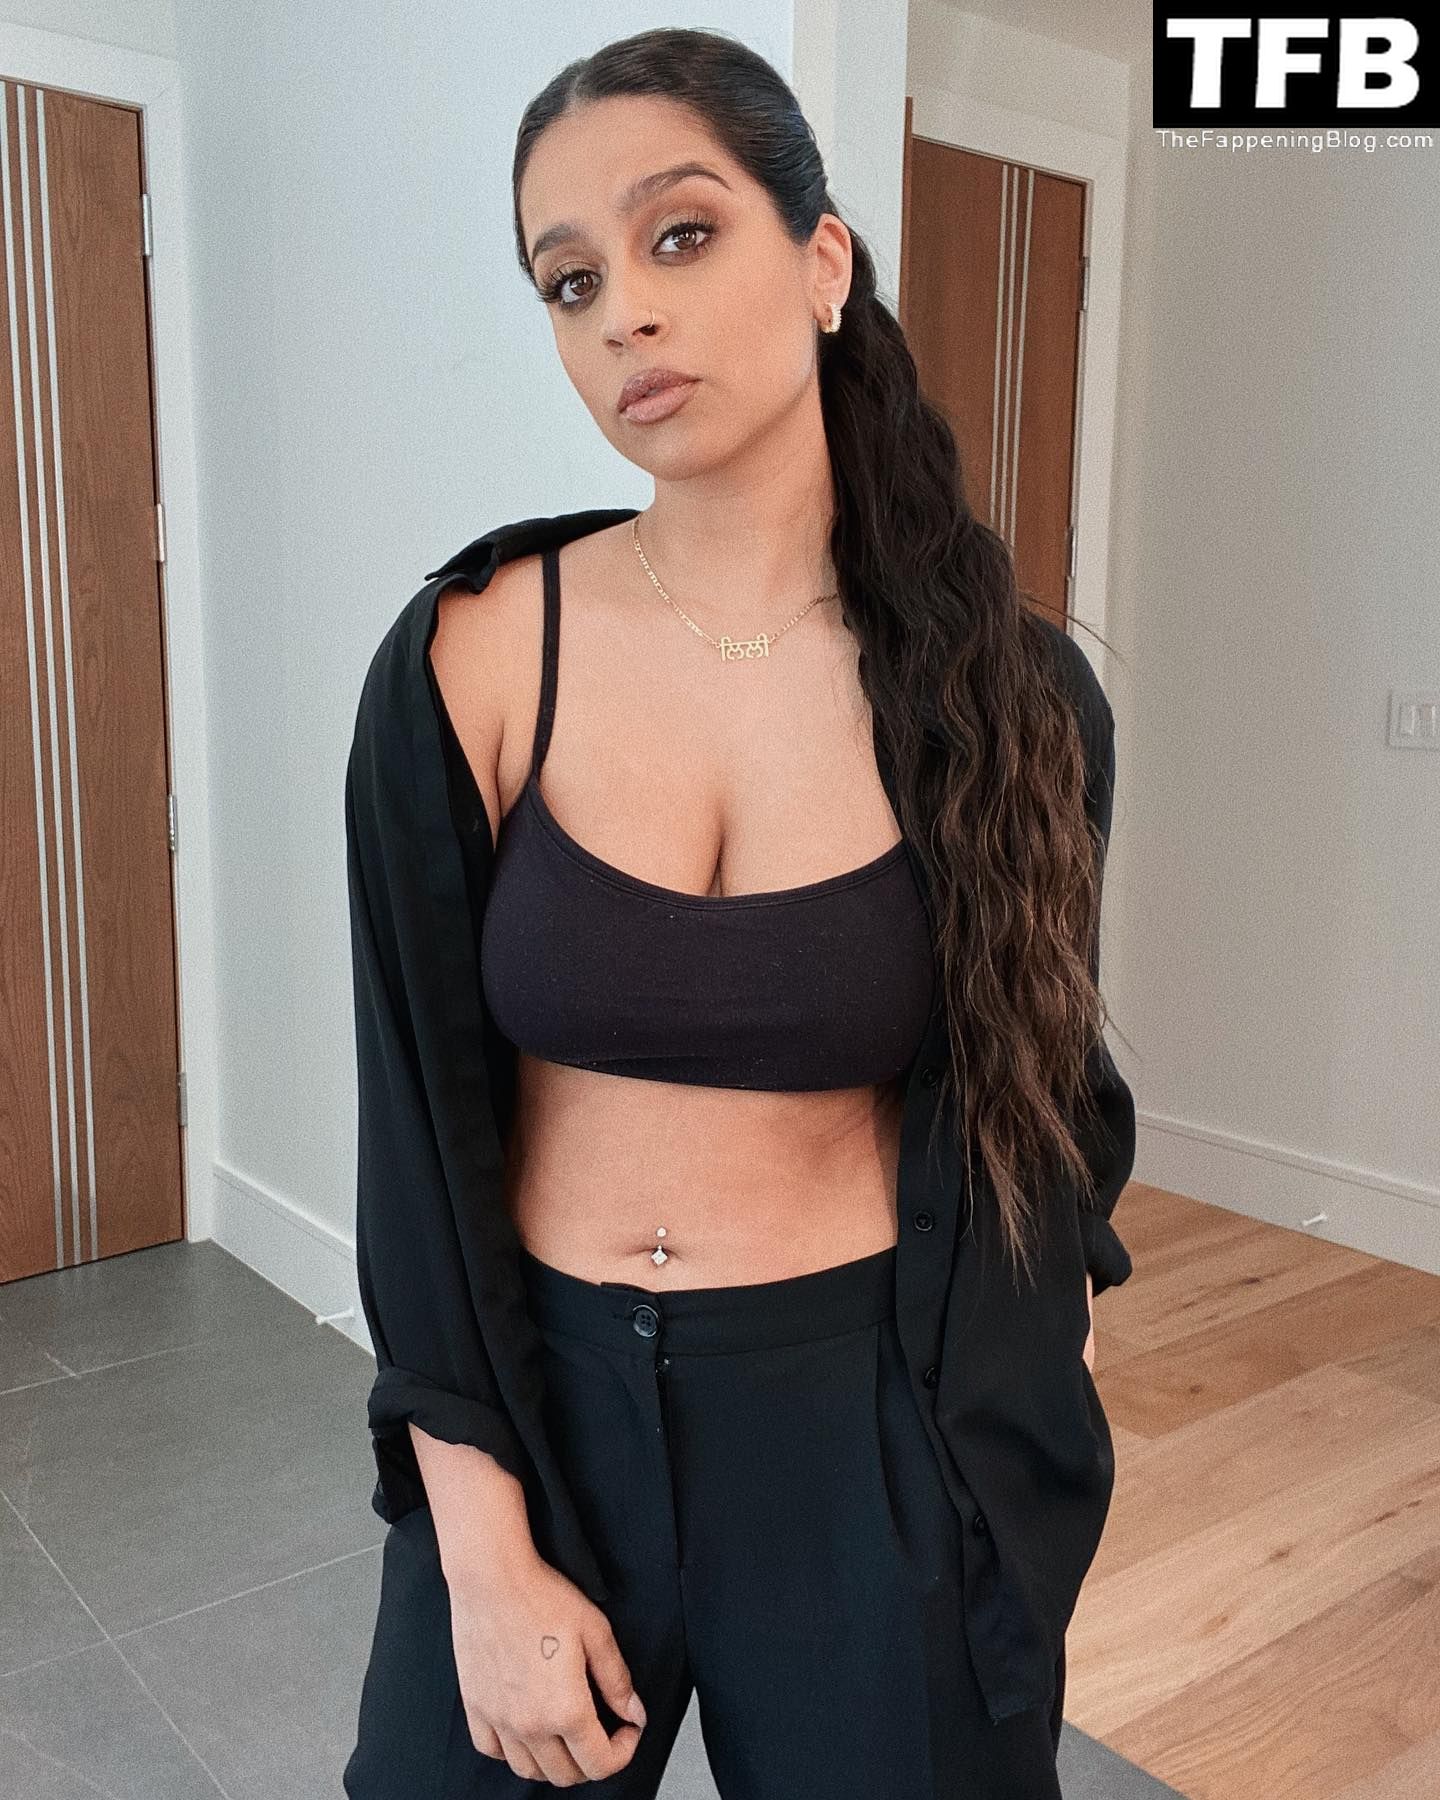 Lilly Singh Topless Sexy 36 thefappeningblog.com  - Lilly Singh Topless & Sexy Collection (89 Photos)